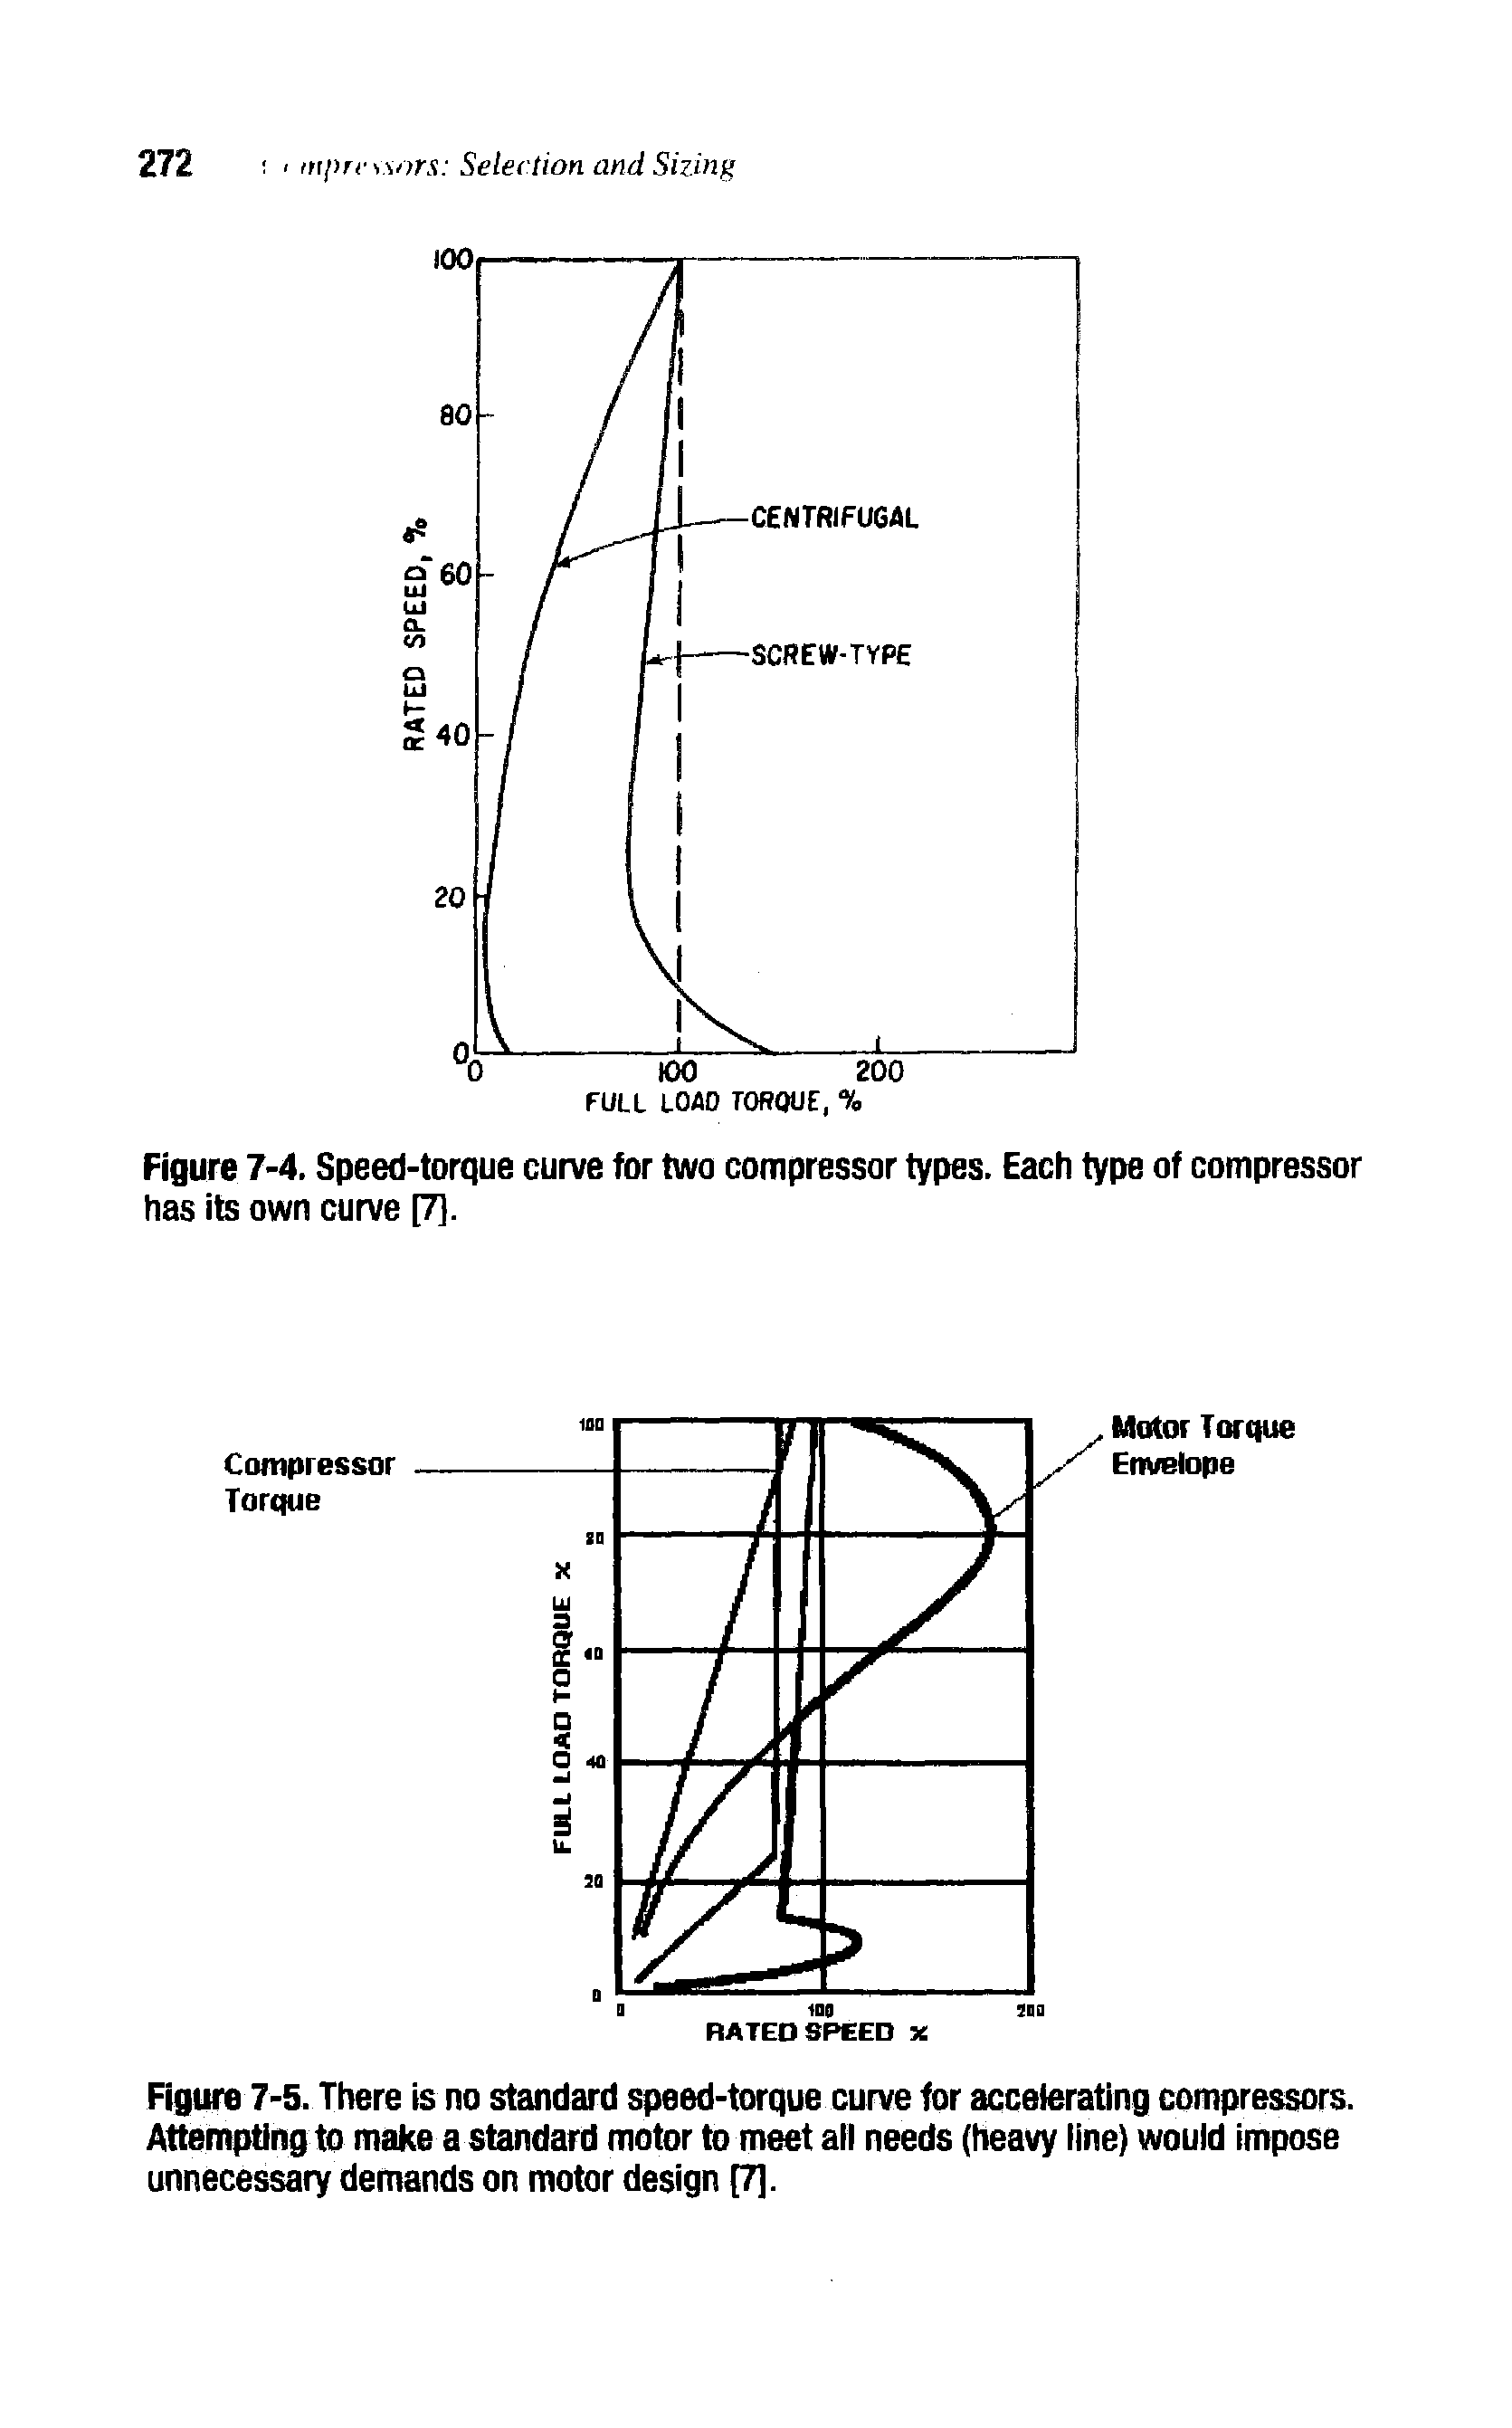 Figure 7-4. Speed-torque curve for two compressor types. Each type of compressor has its own curve [7].